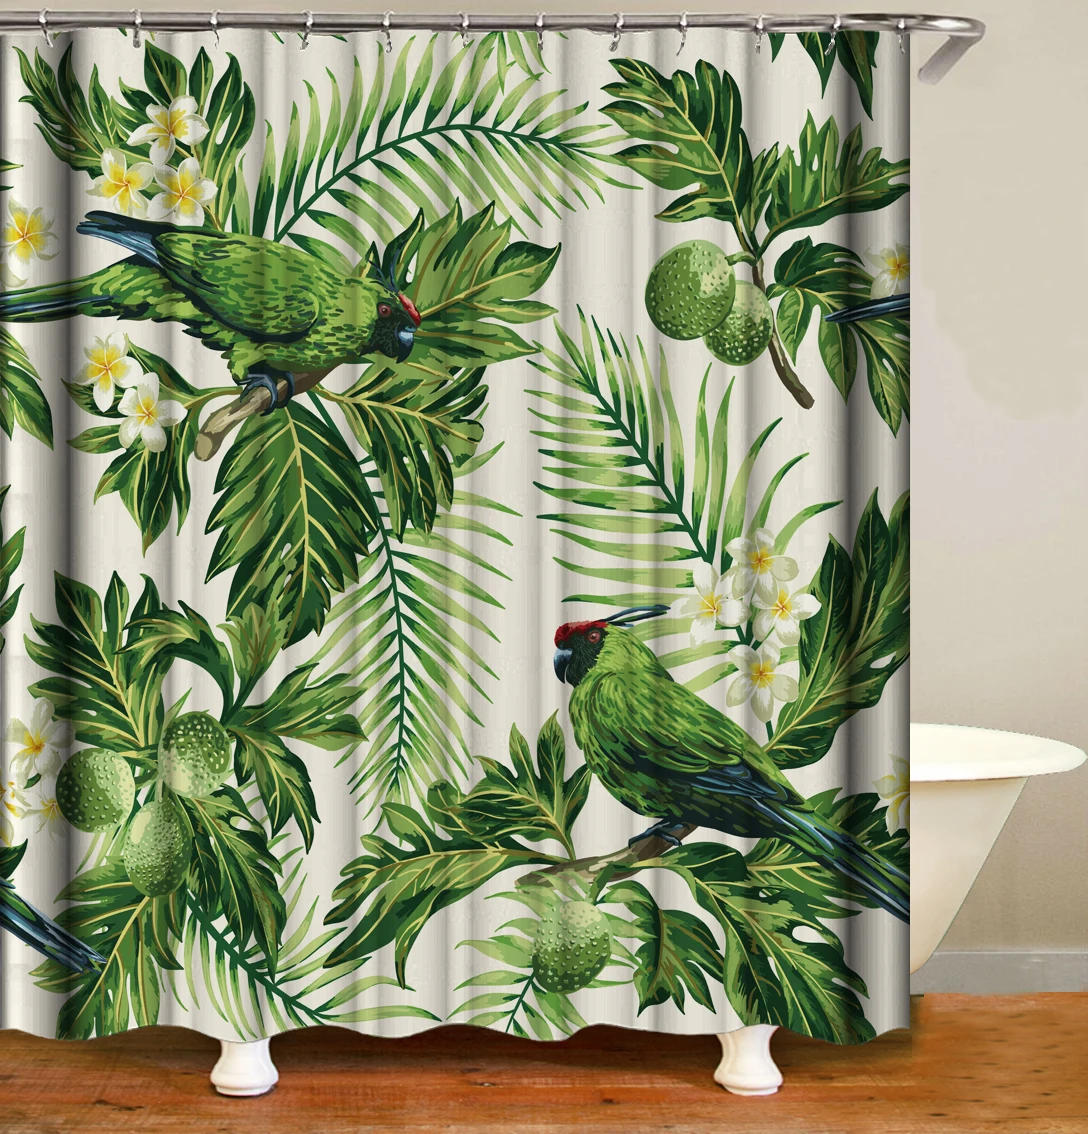 

i@home 3d digital printed nordic decor eco friendly shower curtain with forest polyester, Customer's request